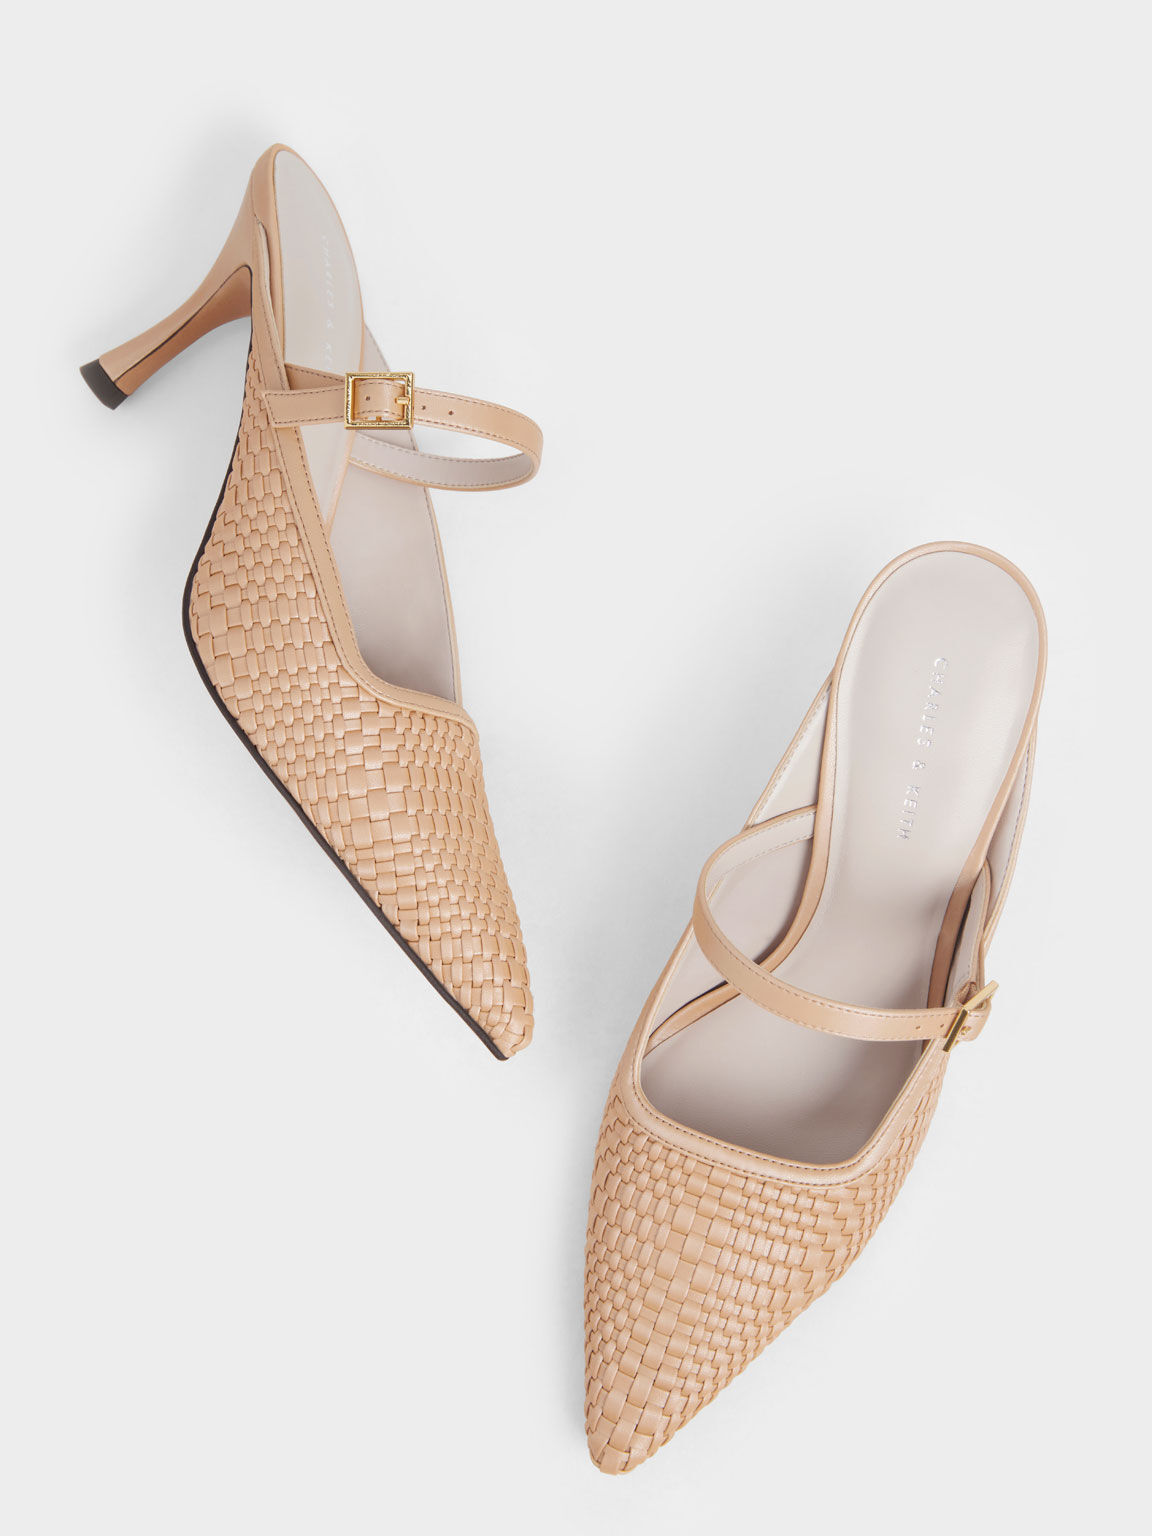 Woven Heeled Mules, Camel, hi-res